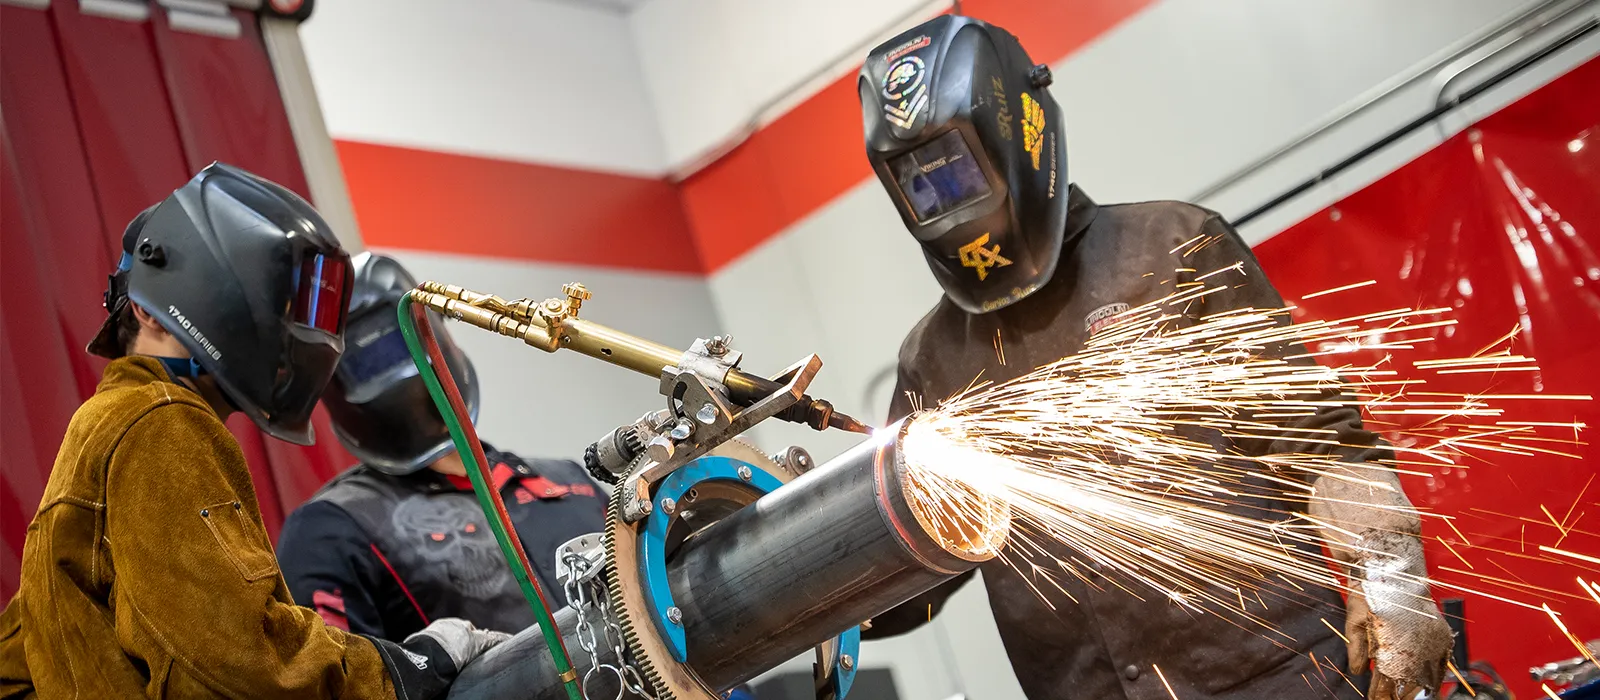 Duty Cycle in Welding Machines: What Is It?